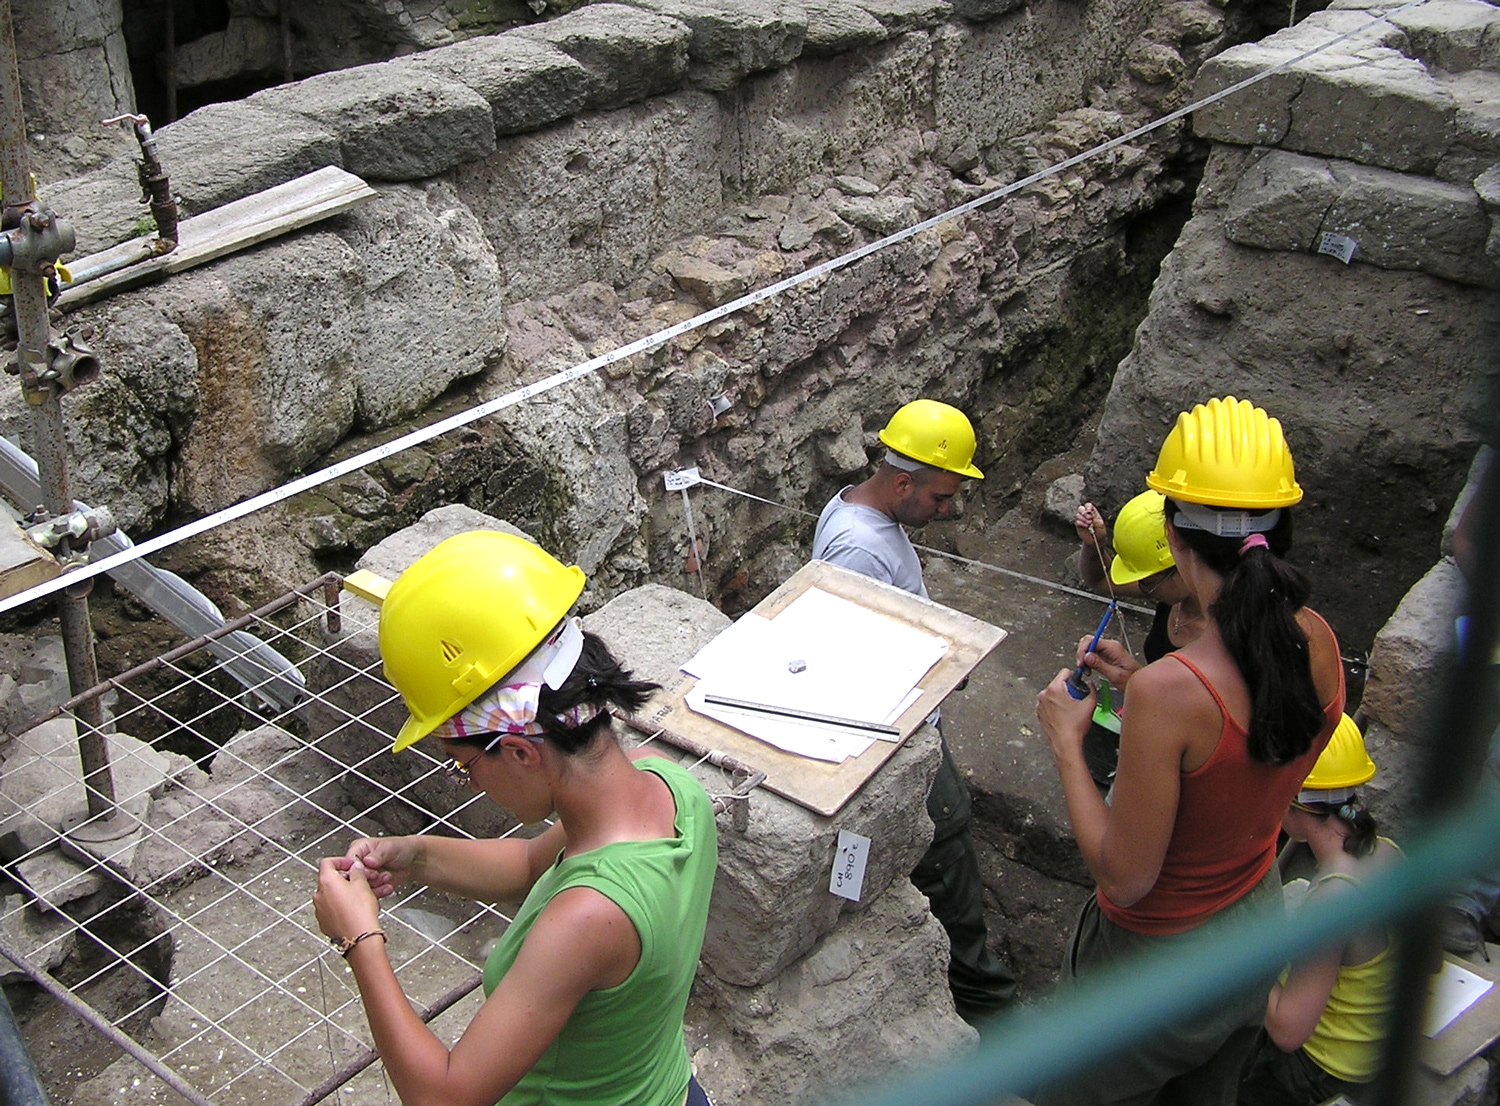 Five archaeologists wear yellow hard hats as they work among ancient ruins.